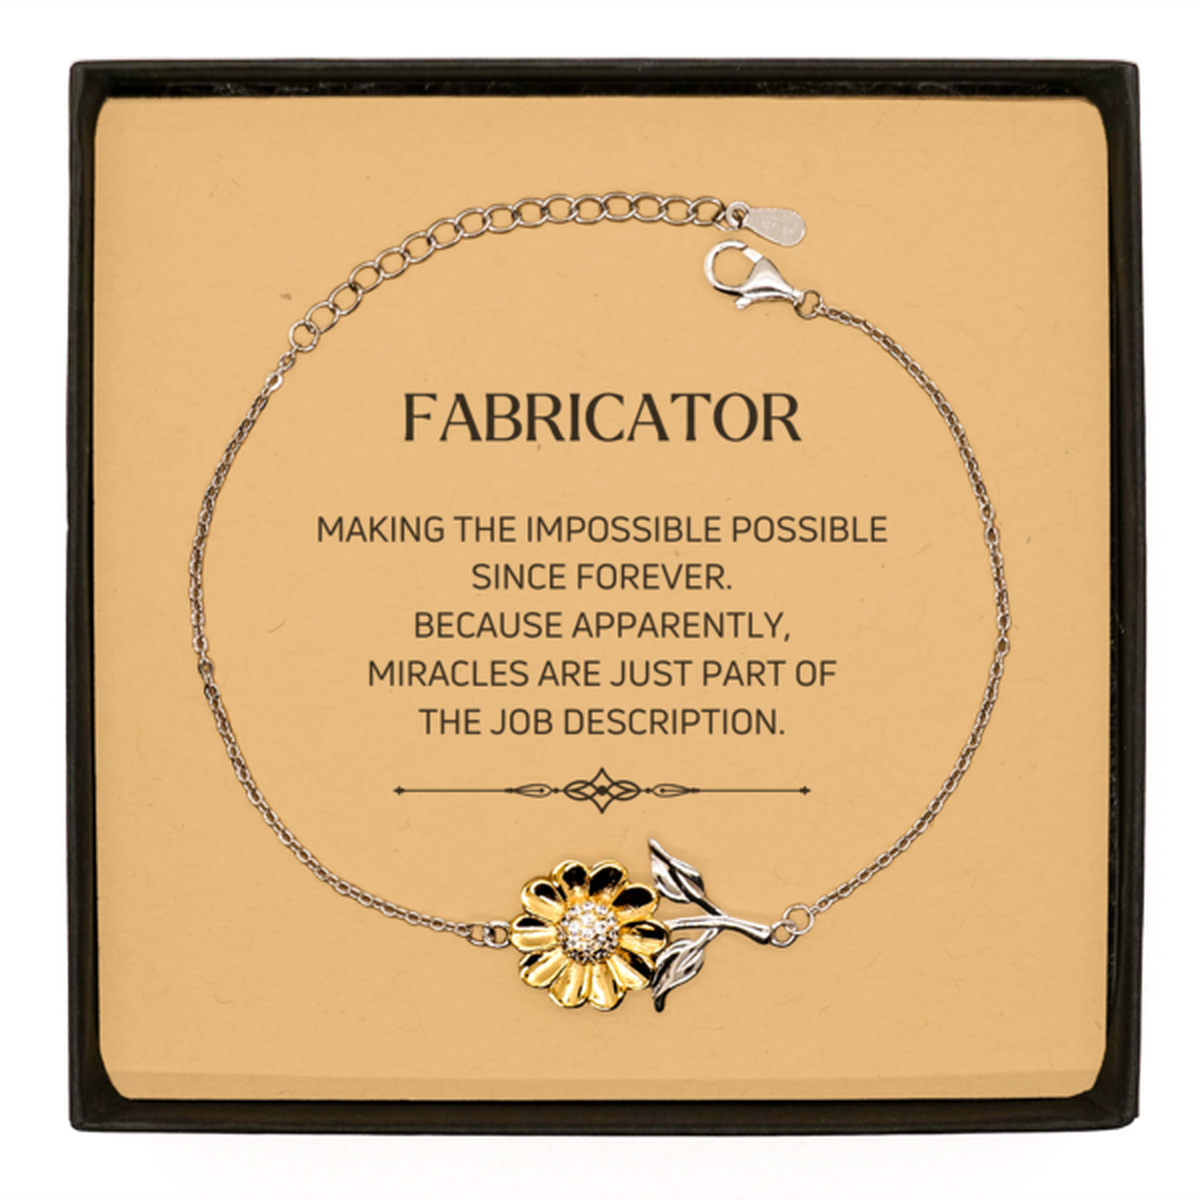 Funny Fabricator Gifts, Miracles are just part of the job description, Inspirational Birthday Sunflower Bracelet For Fabricator, Men, Women, Coworkers, Friends, Boss